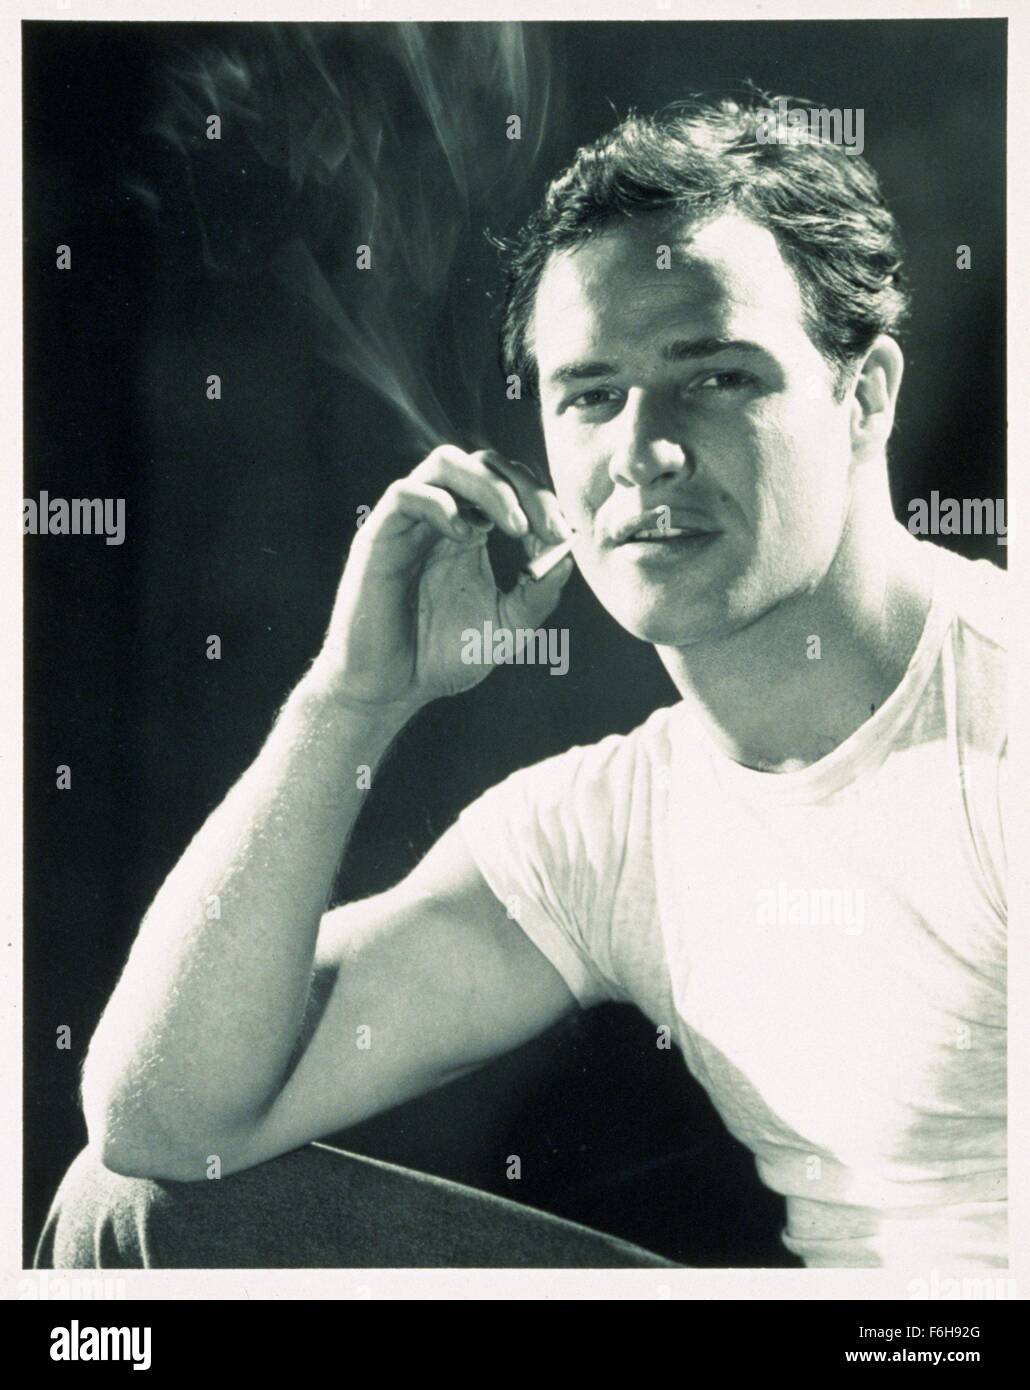 1954, Film Title: STREETCAR NAMED DESIRE, Pictured: T-SHIRT, 1954, MARLON BRANDO, CLOTHING, COLOR, SMOKERS, TEE SHIRT. (Credit Image: SNAP) Stock Photo